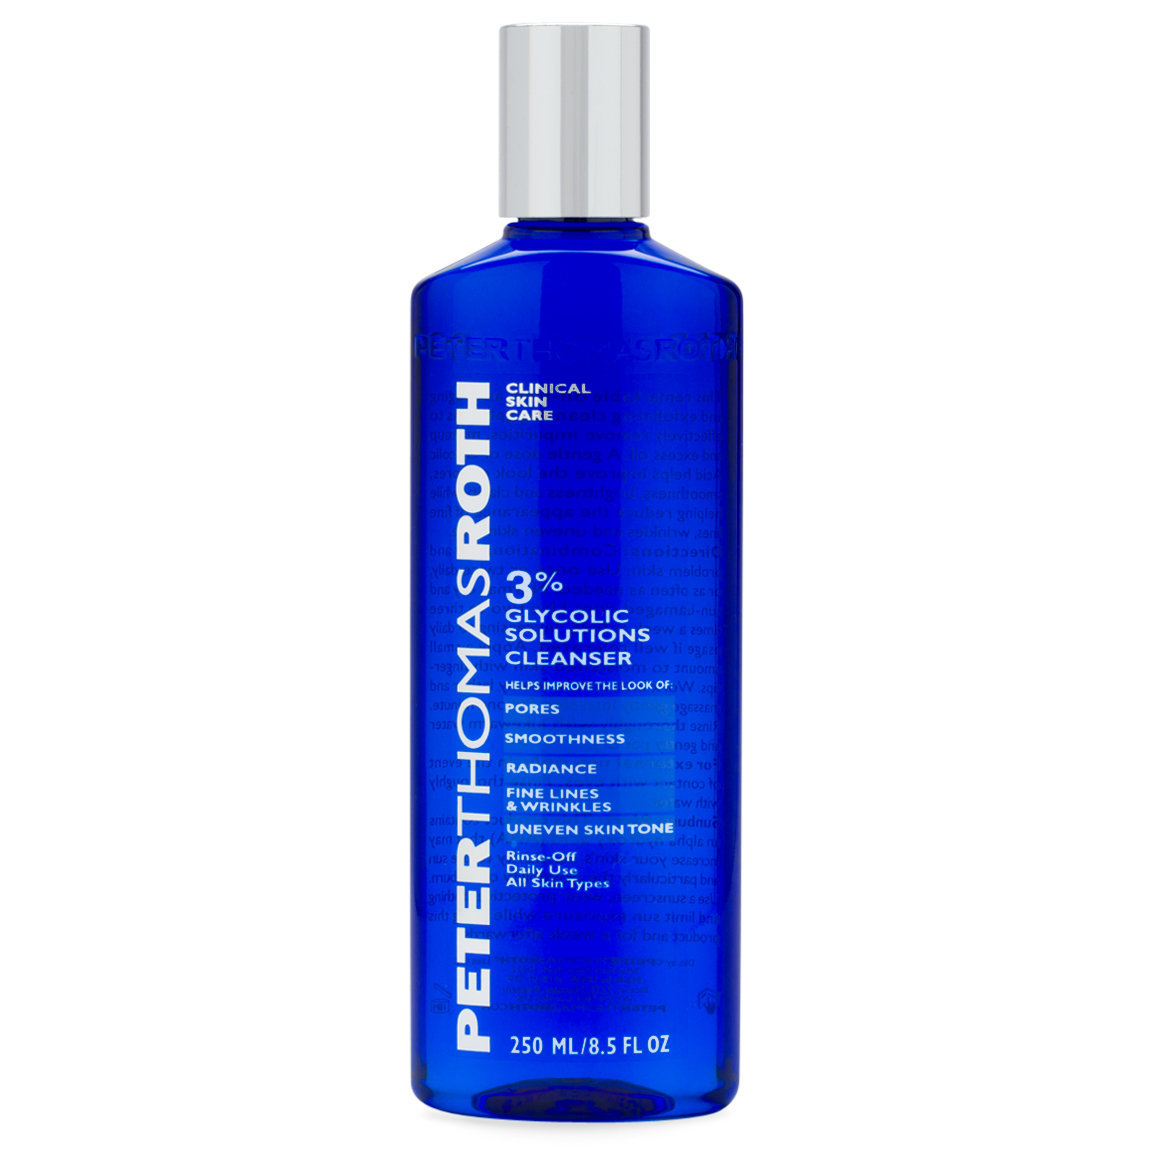 Peter Thomas Roth 3% Glycolic Acid Solutions Cleanser | Beautylish